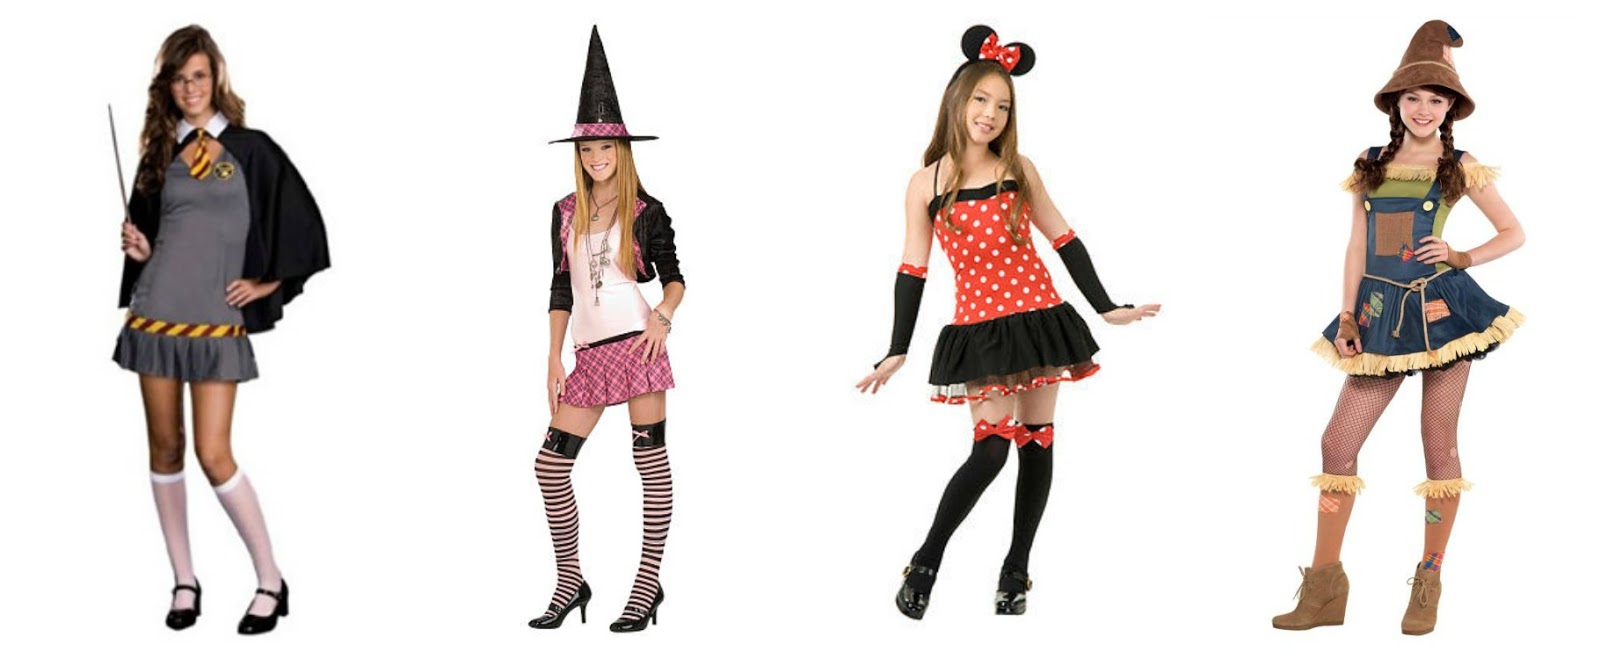 10 Modest Versions of Popular Teen Girl Halloween Costumes hq pic